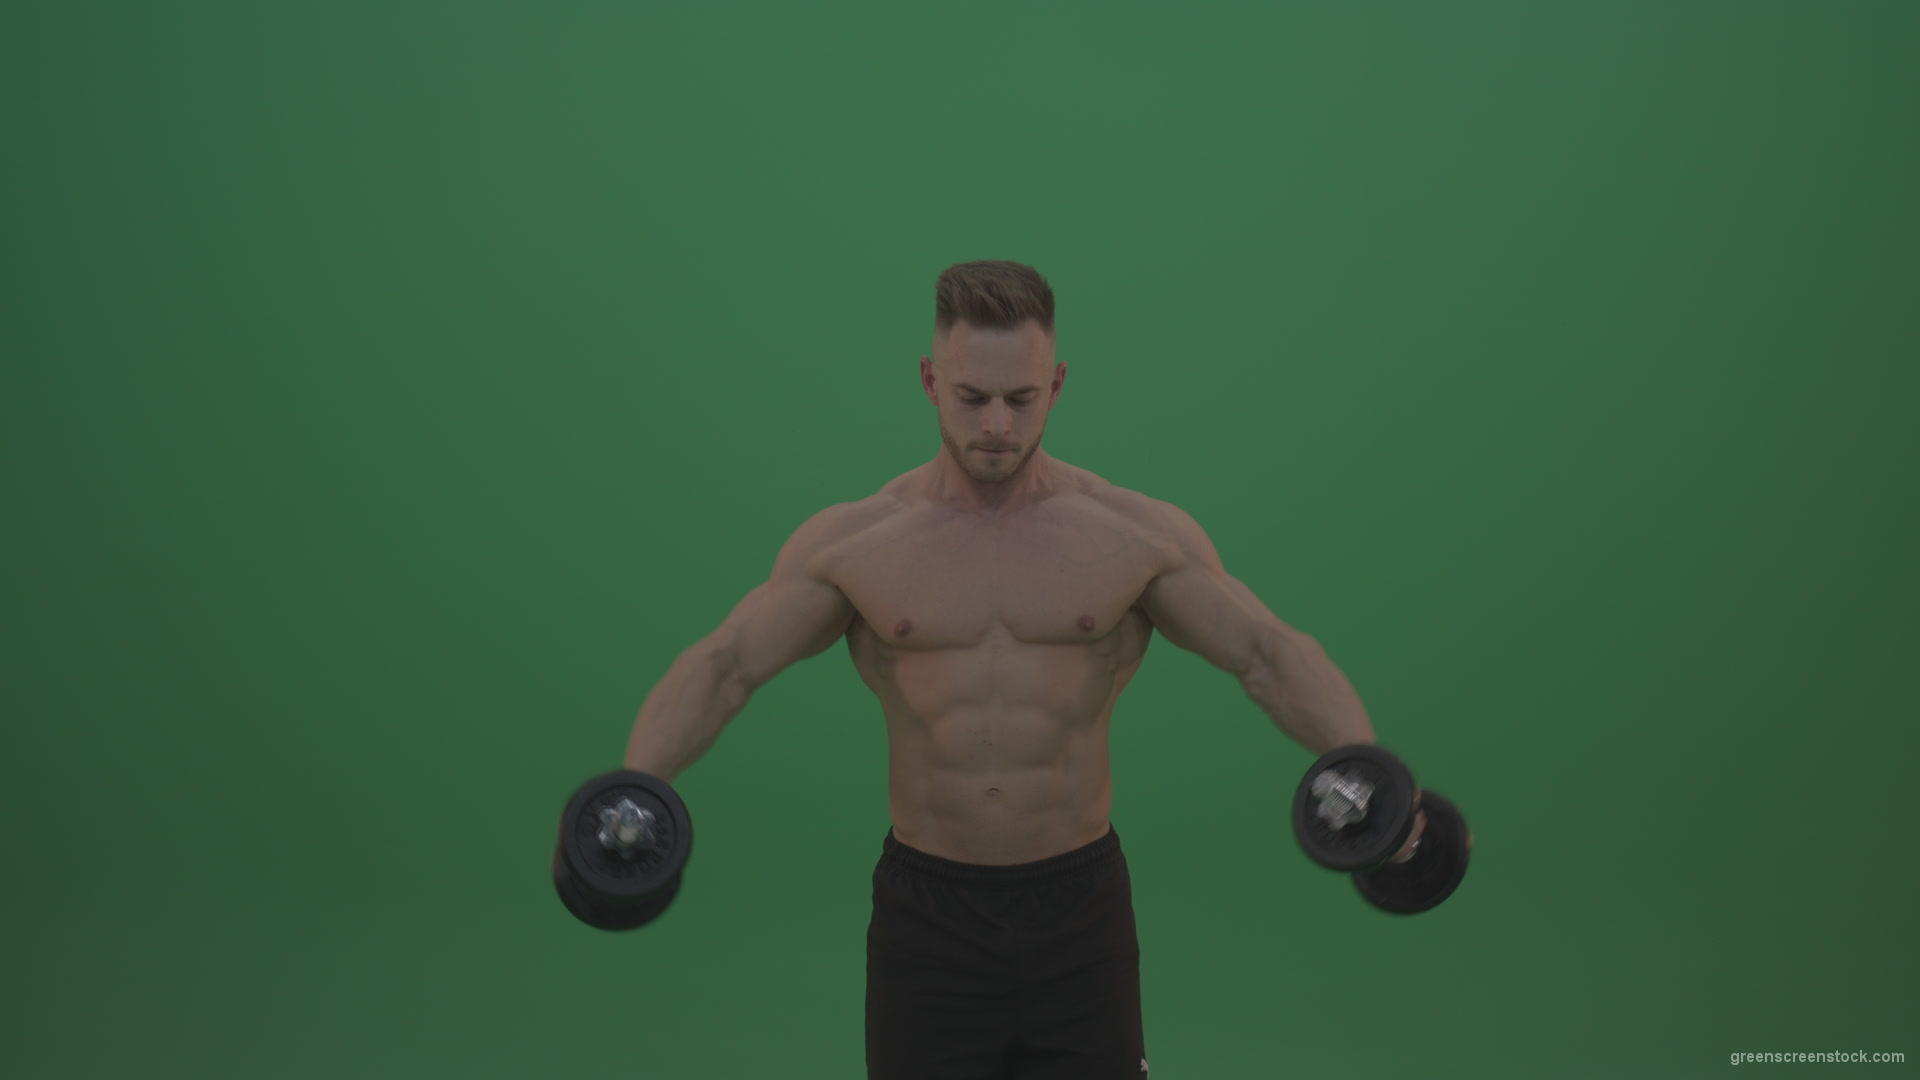 Young_Sportsman_Doing_Workout_Two_Handed_Excercise_For_Pectoral_Muscles_Pushing_Up_Dembbells_On_Green_Screen_Chroma_Key_Wall_Background_002 Green Screen Stock